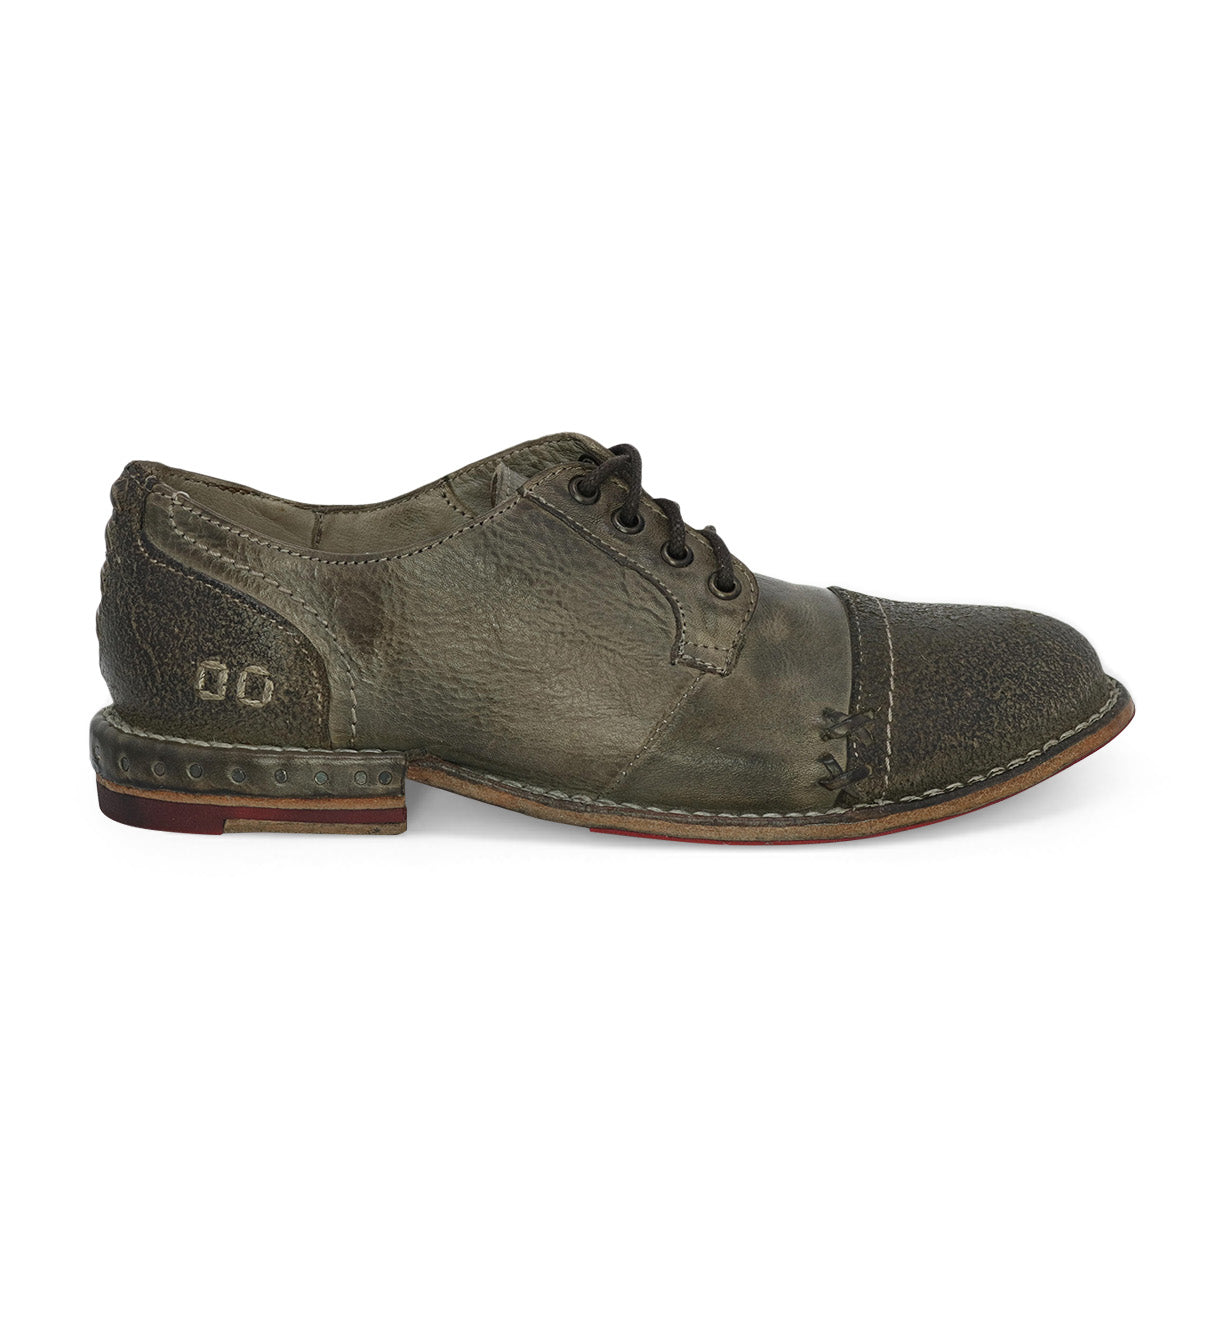 A pair of Bed Stu men's green Plio oxford shoes.